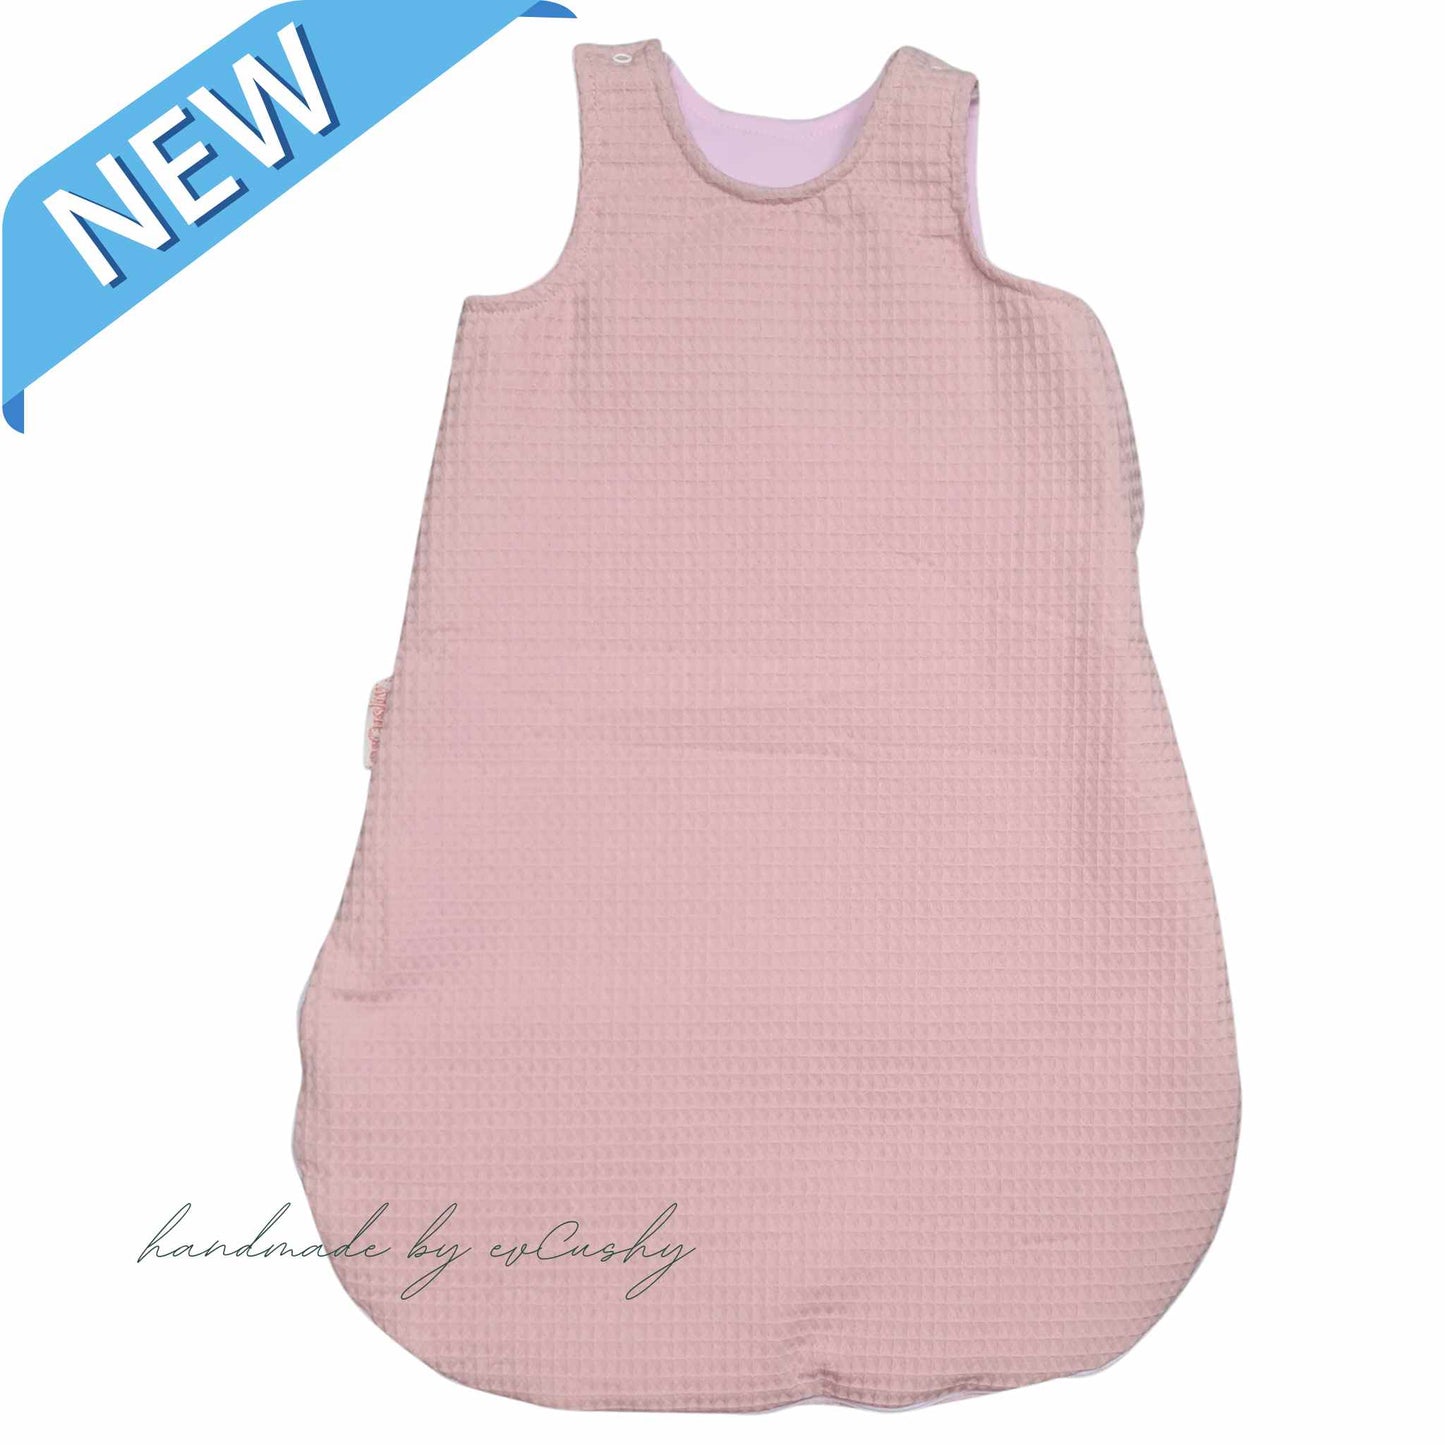 plain sleeping bag for baby dasty pink with pink lining 100% cotton 0-6 months in Ireland